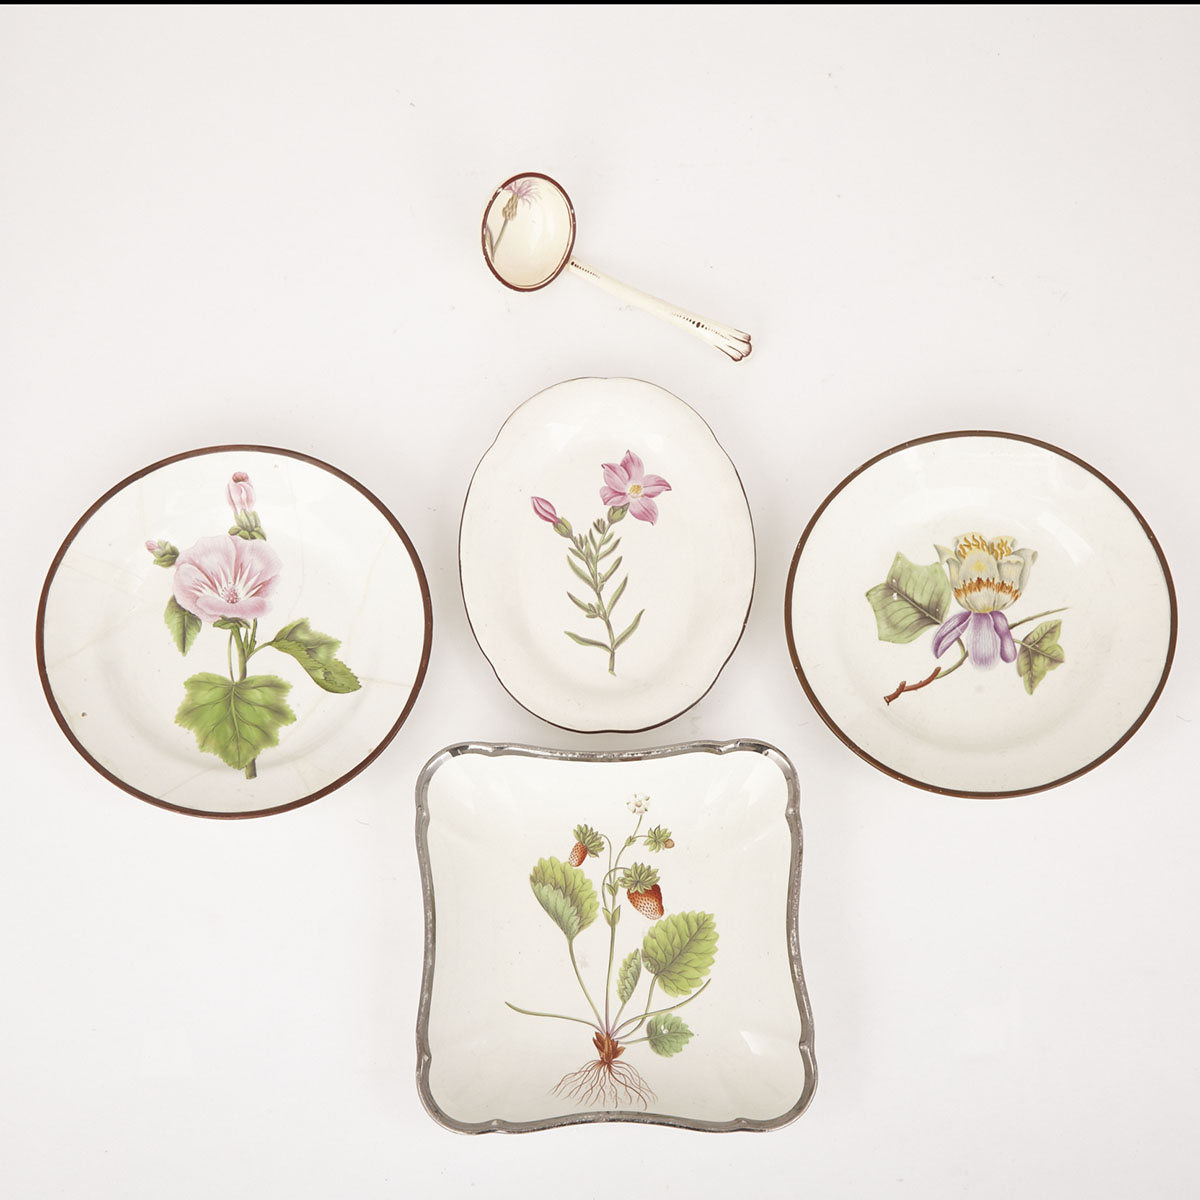 Group of Three English Pearlware Botanical Plates, Dish and Ladle, early 19th century